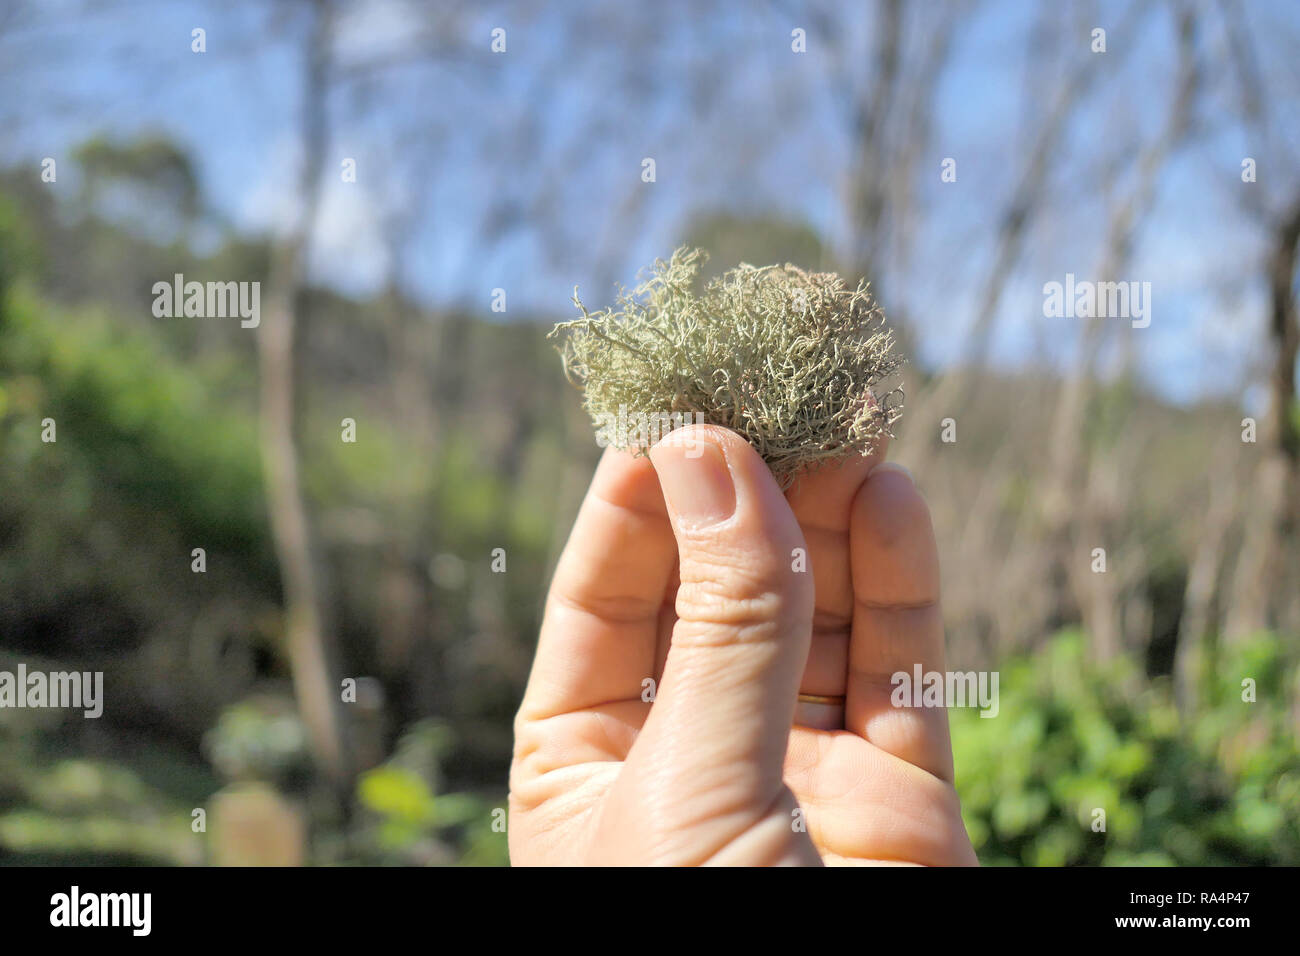 Photo of Fruticose lichen on hand in the daylight Stock Photo